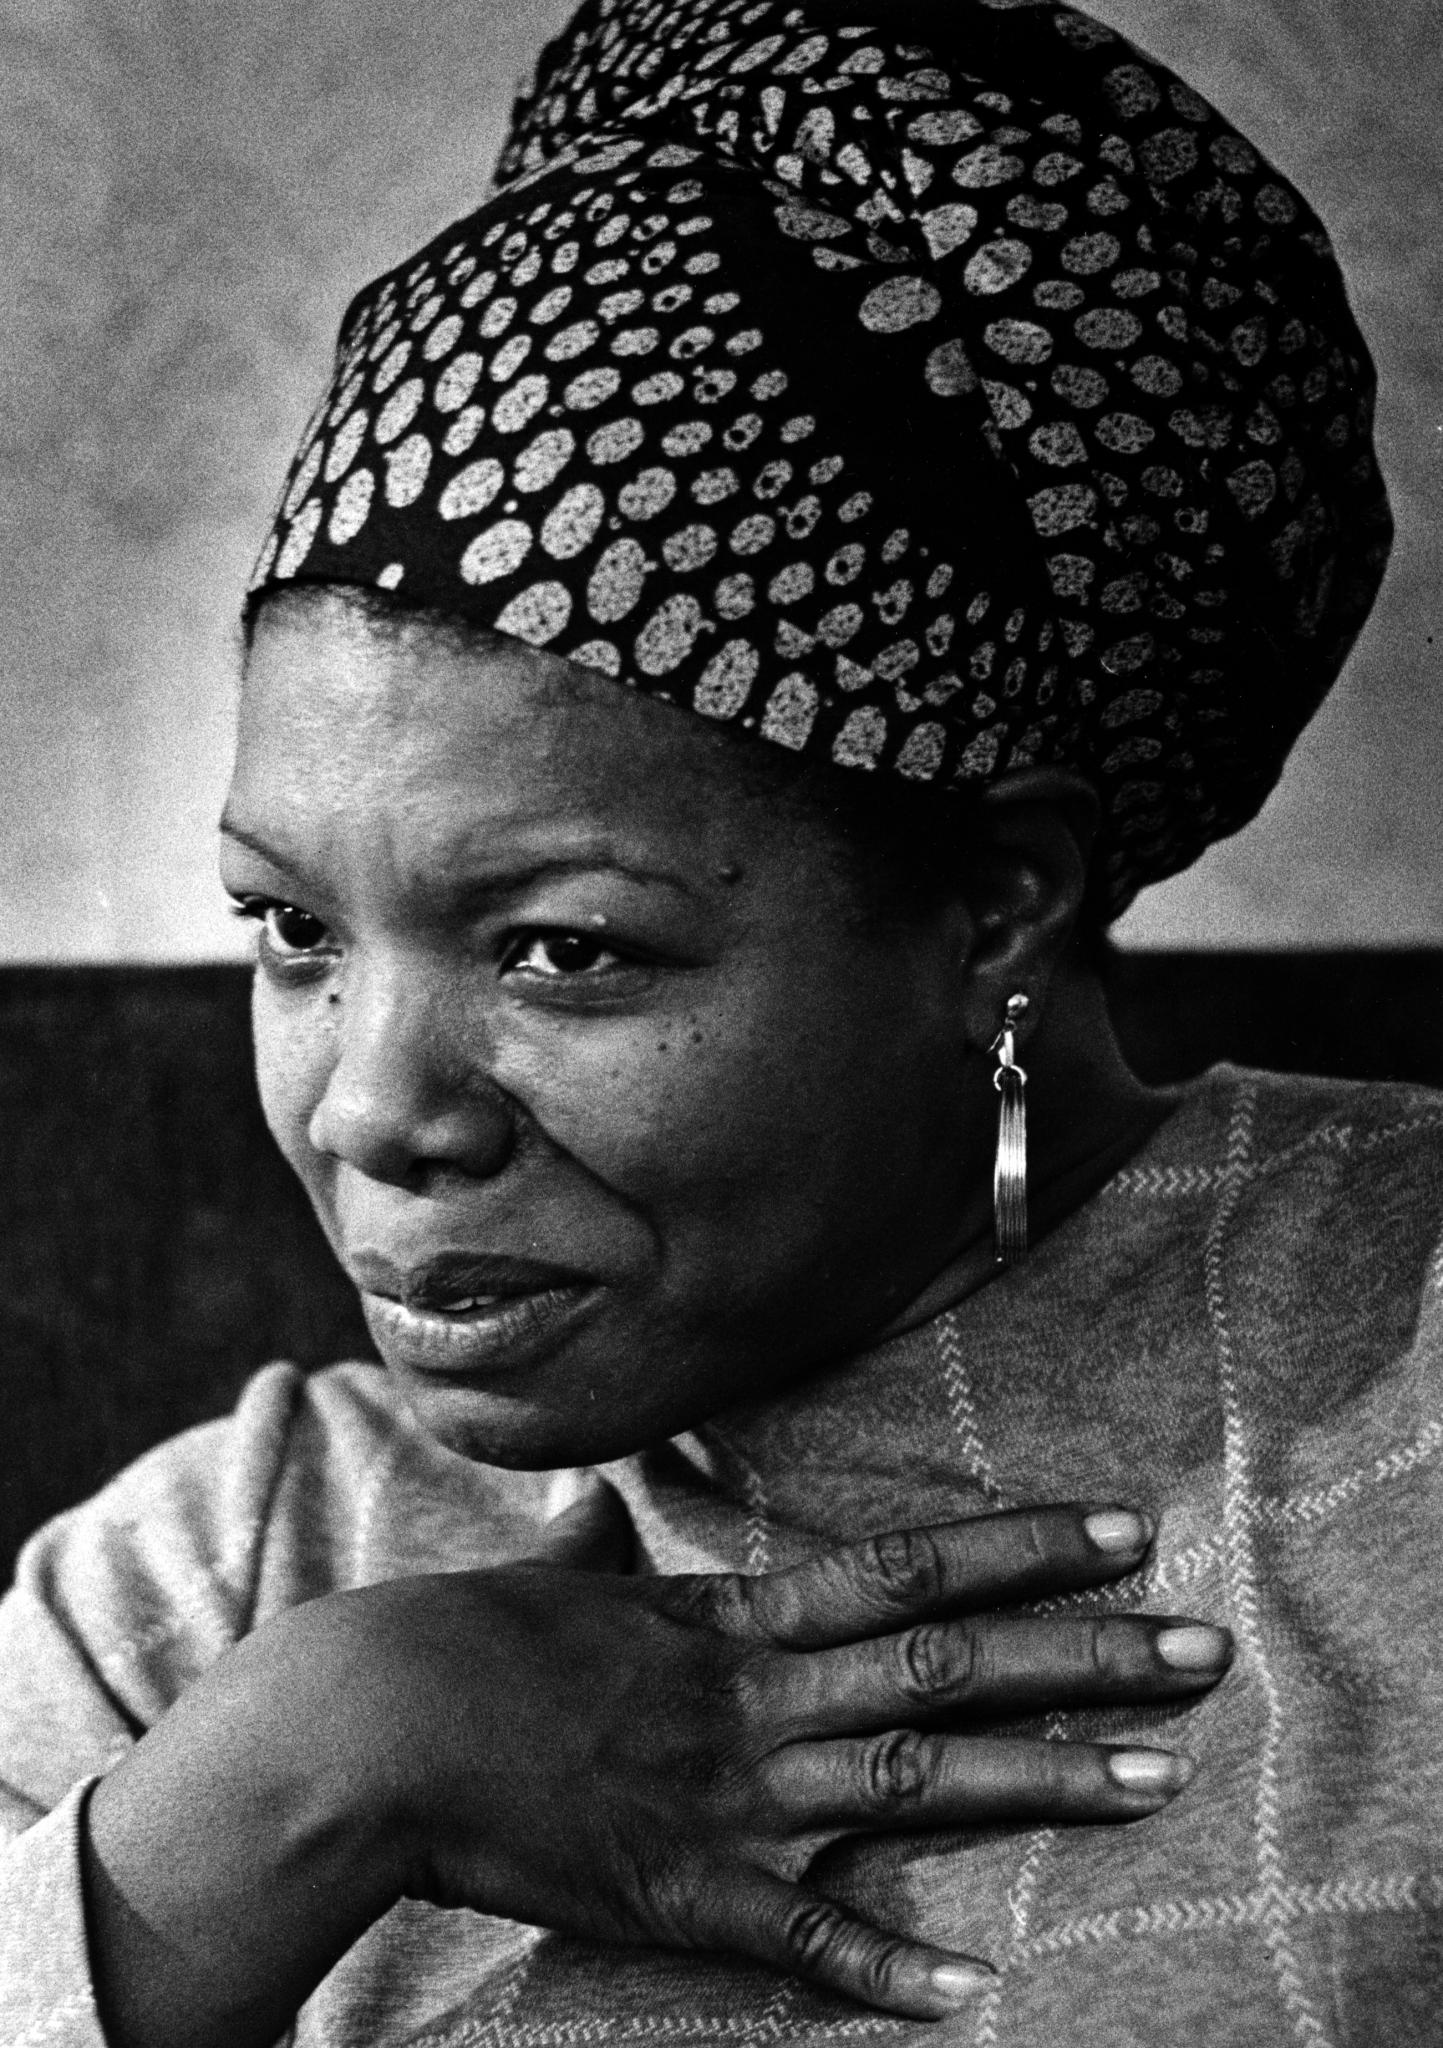 There's a Kickstarter Campaign for a Maya Angelou Documentary
